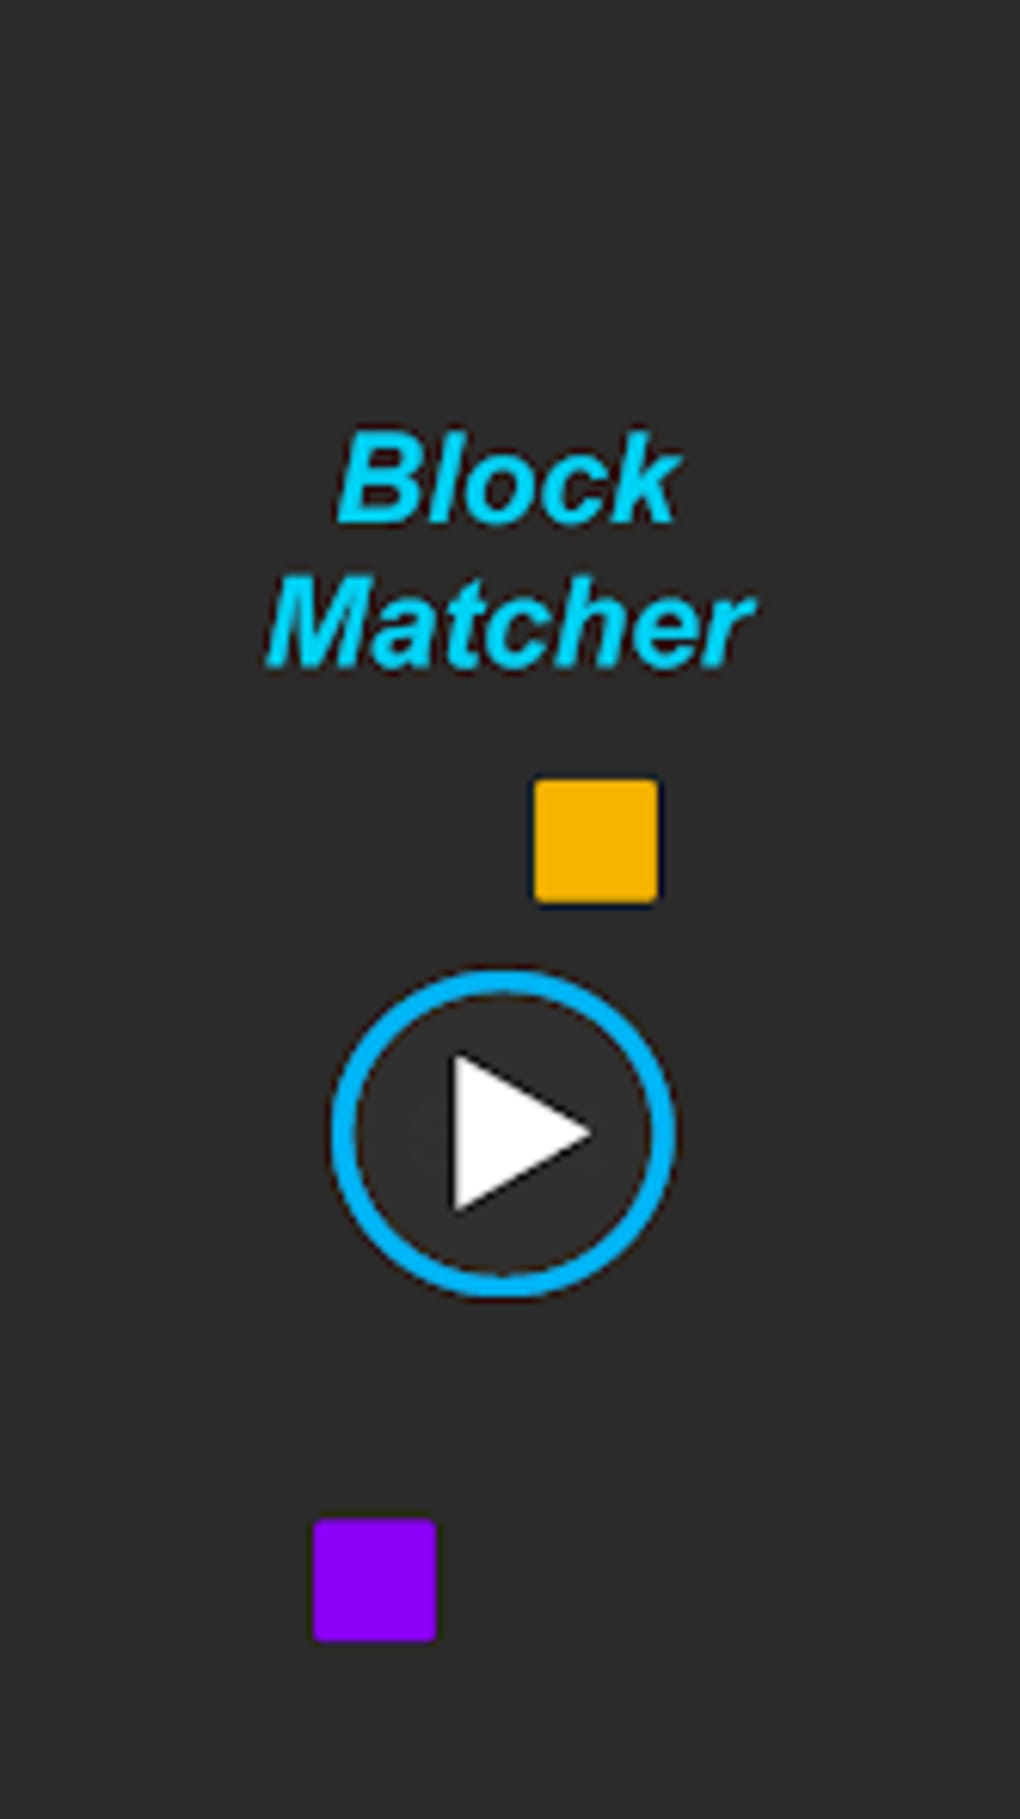 Blocks Match game app with 120 Levels android studio